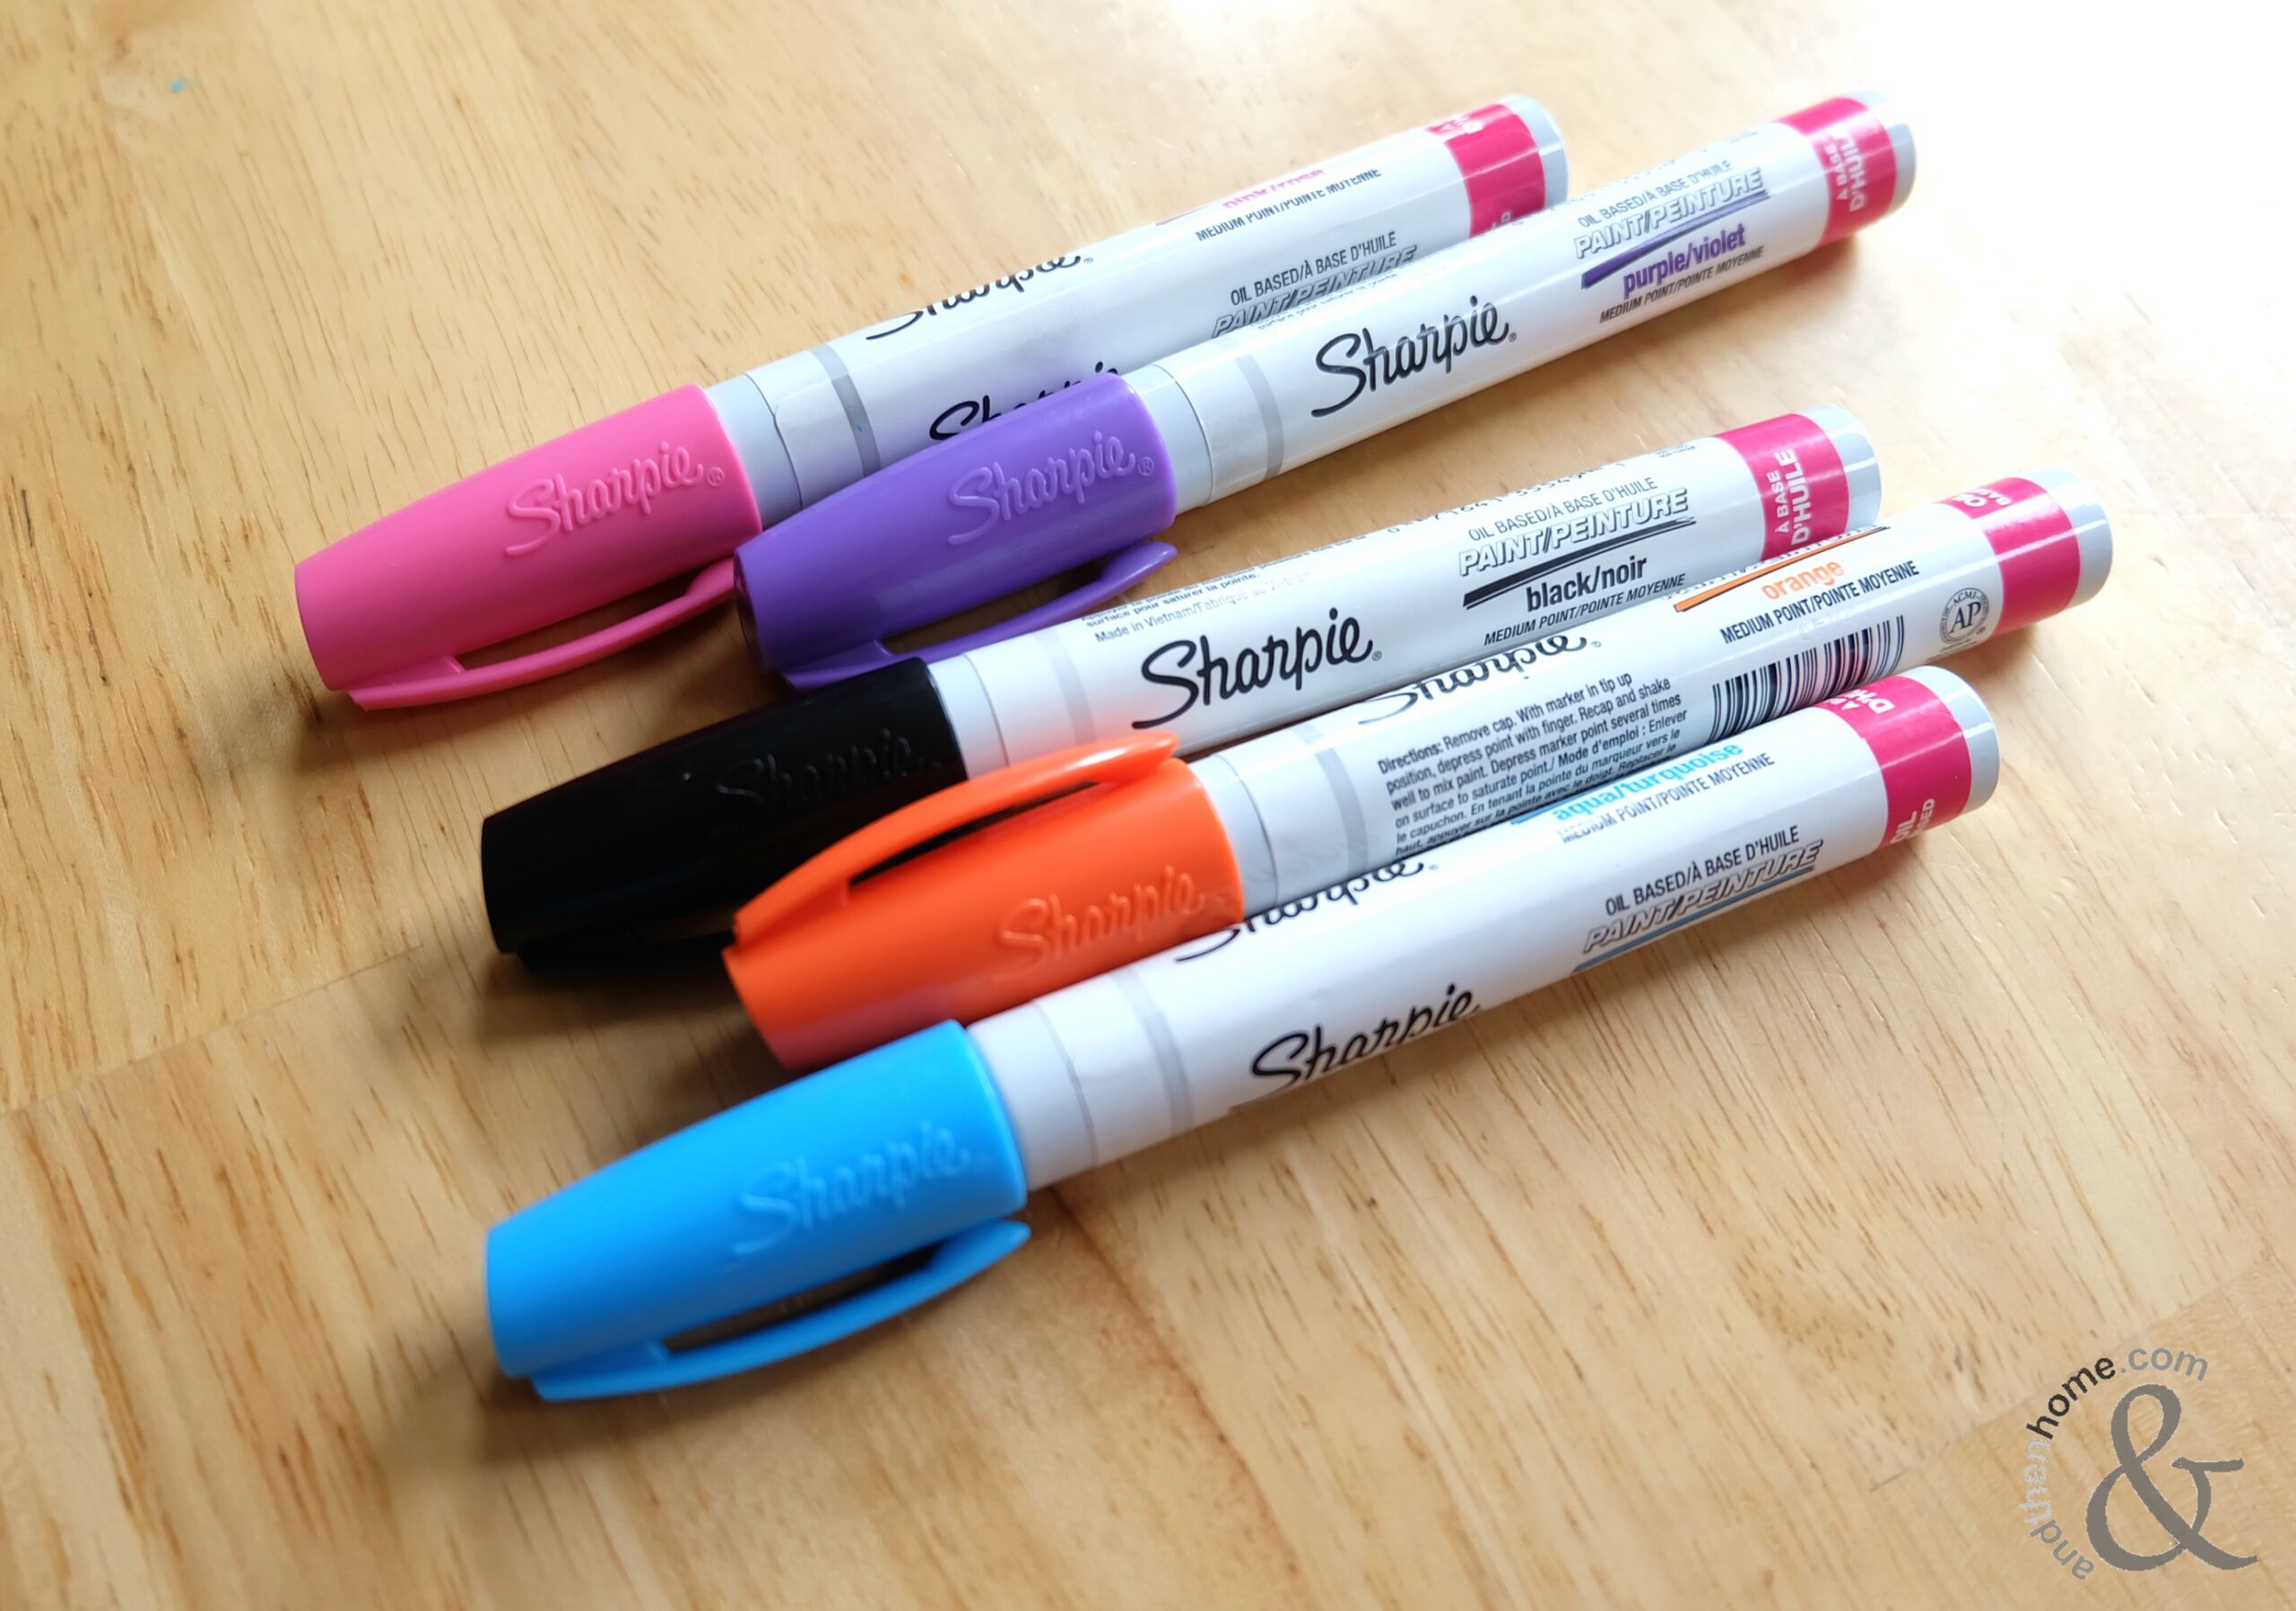 https://www.andthenhome.com/wp-content/uploads/2017/09/The-Best-Sharpie-Paint-Pen-Review-4-scaled.jpg